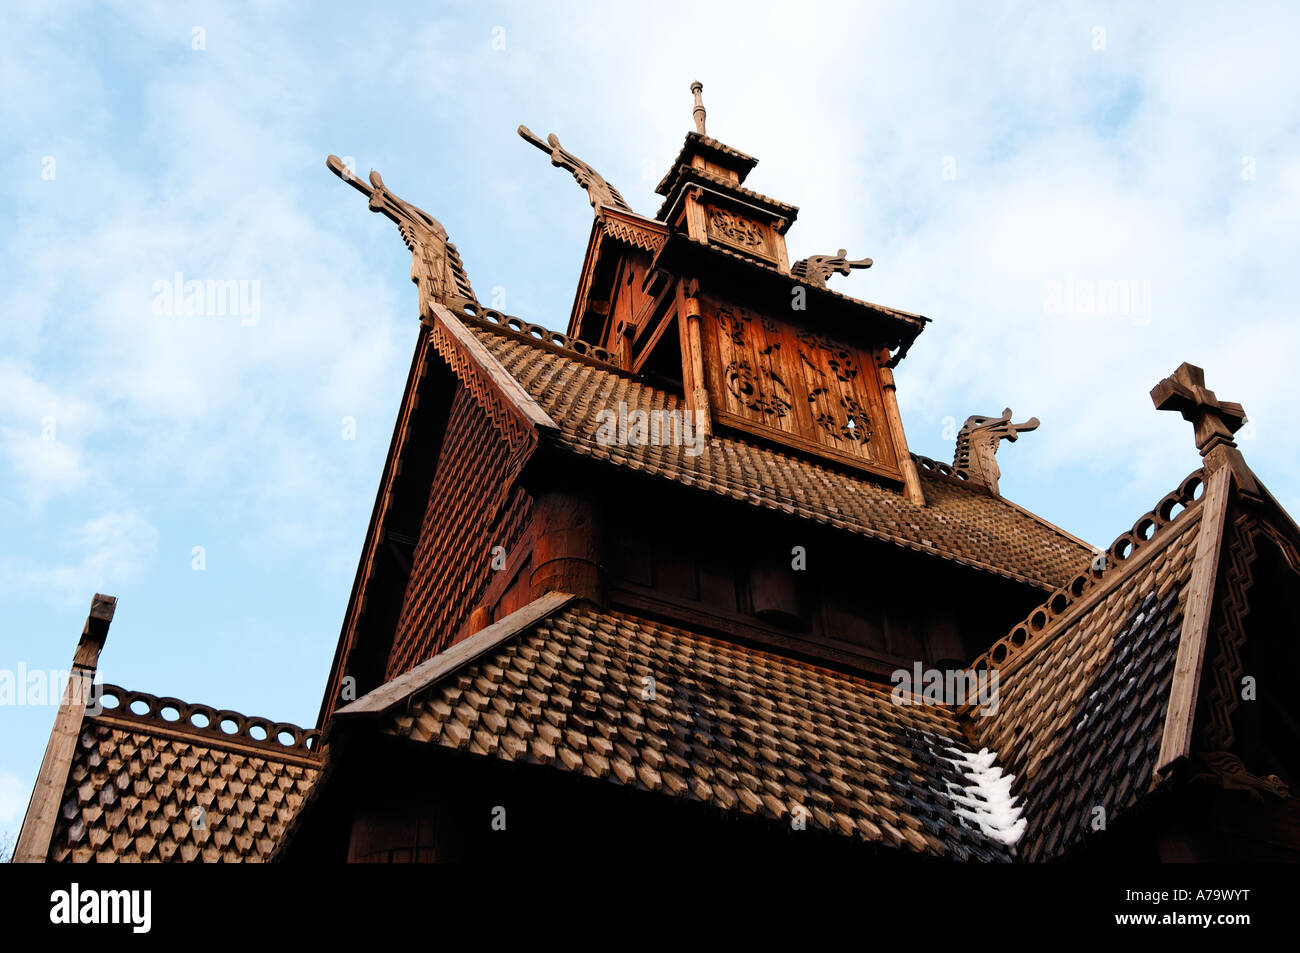 Traditional Stave Church at the Norsk Folkemuseum which is Norways largest open air museum of architecture and traditions Stock Photo